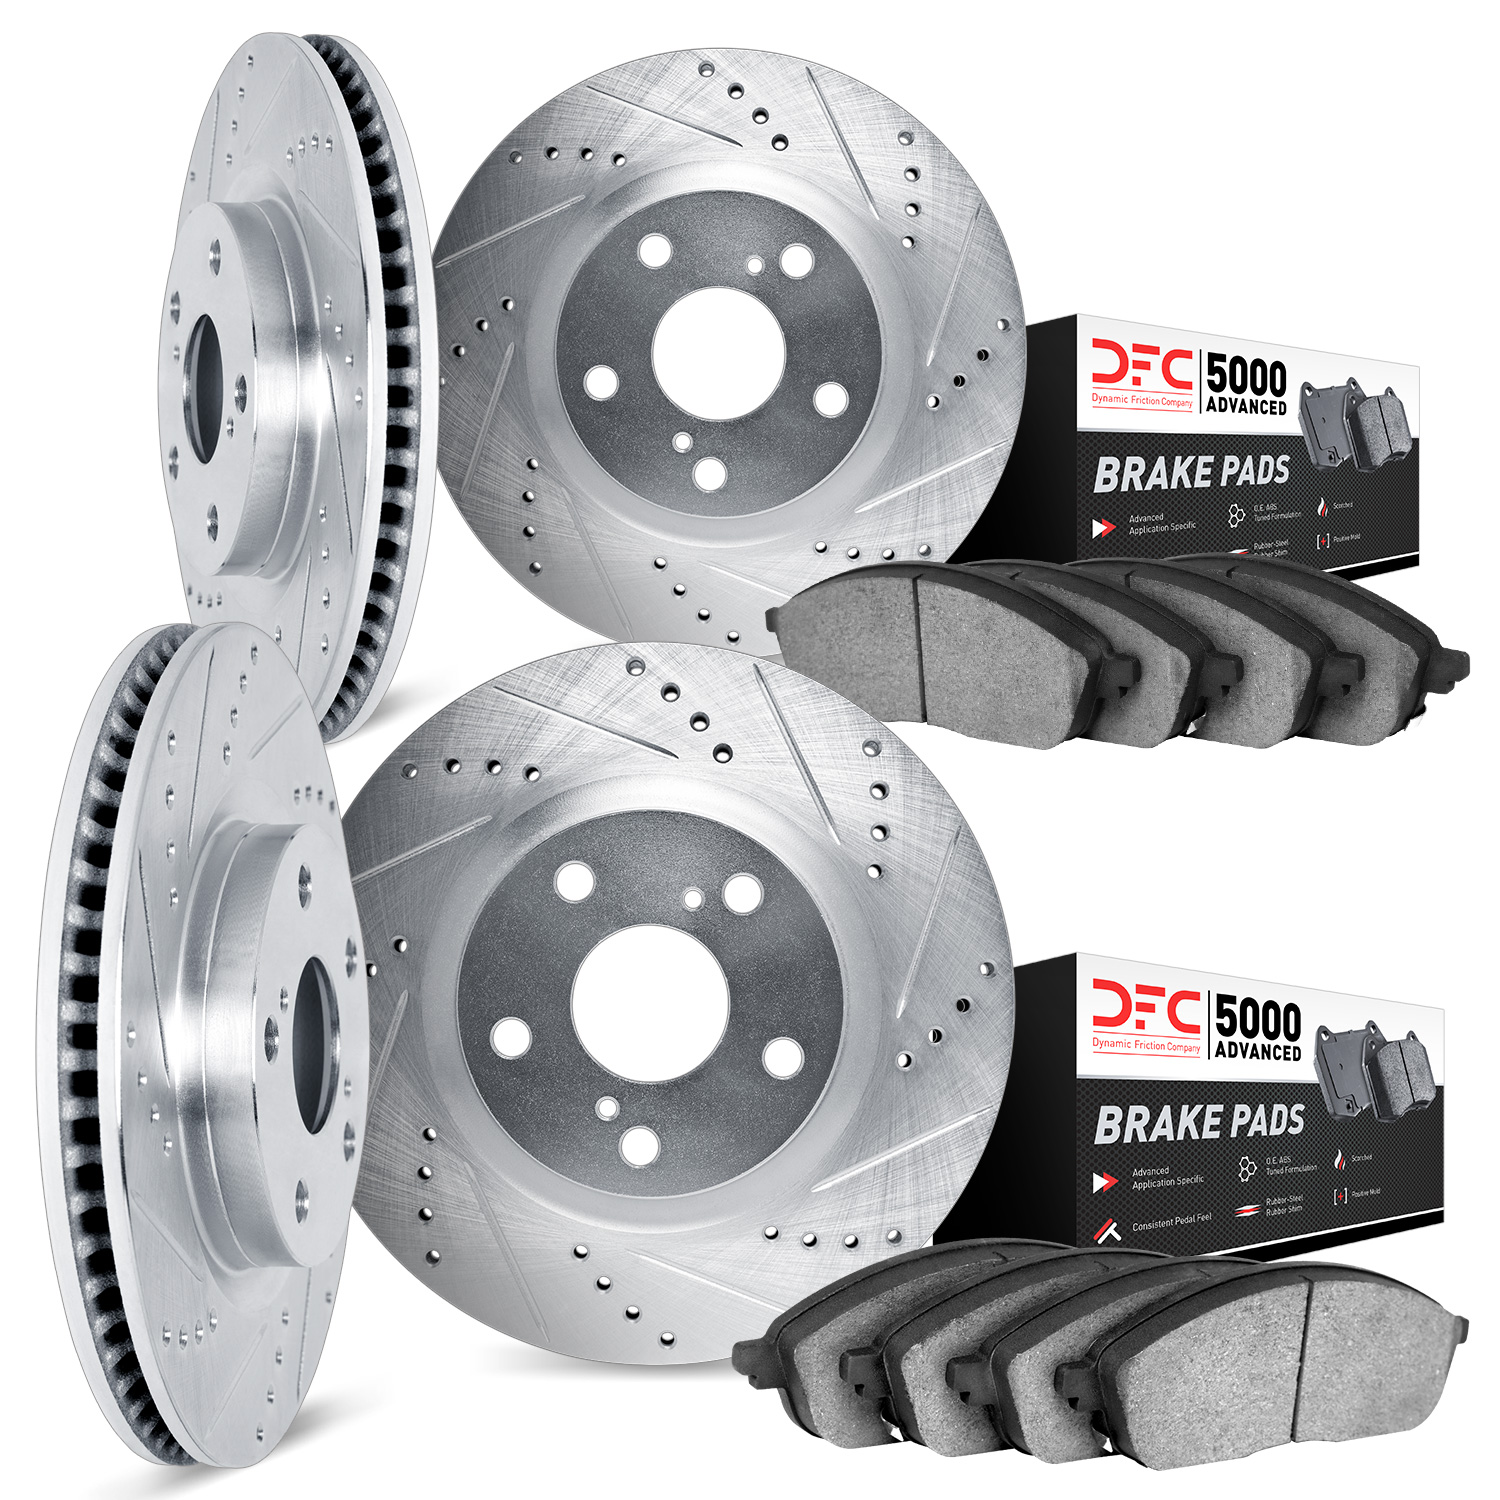 7504-27010 Drilled/Slotted Brake Rotors w/5000 Advanced Brake Pads Kit [Silver], 2007-2015 Volvo, Position: Front and Rear